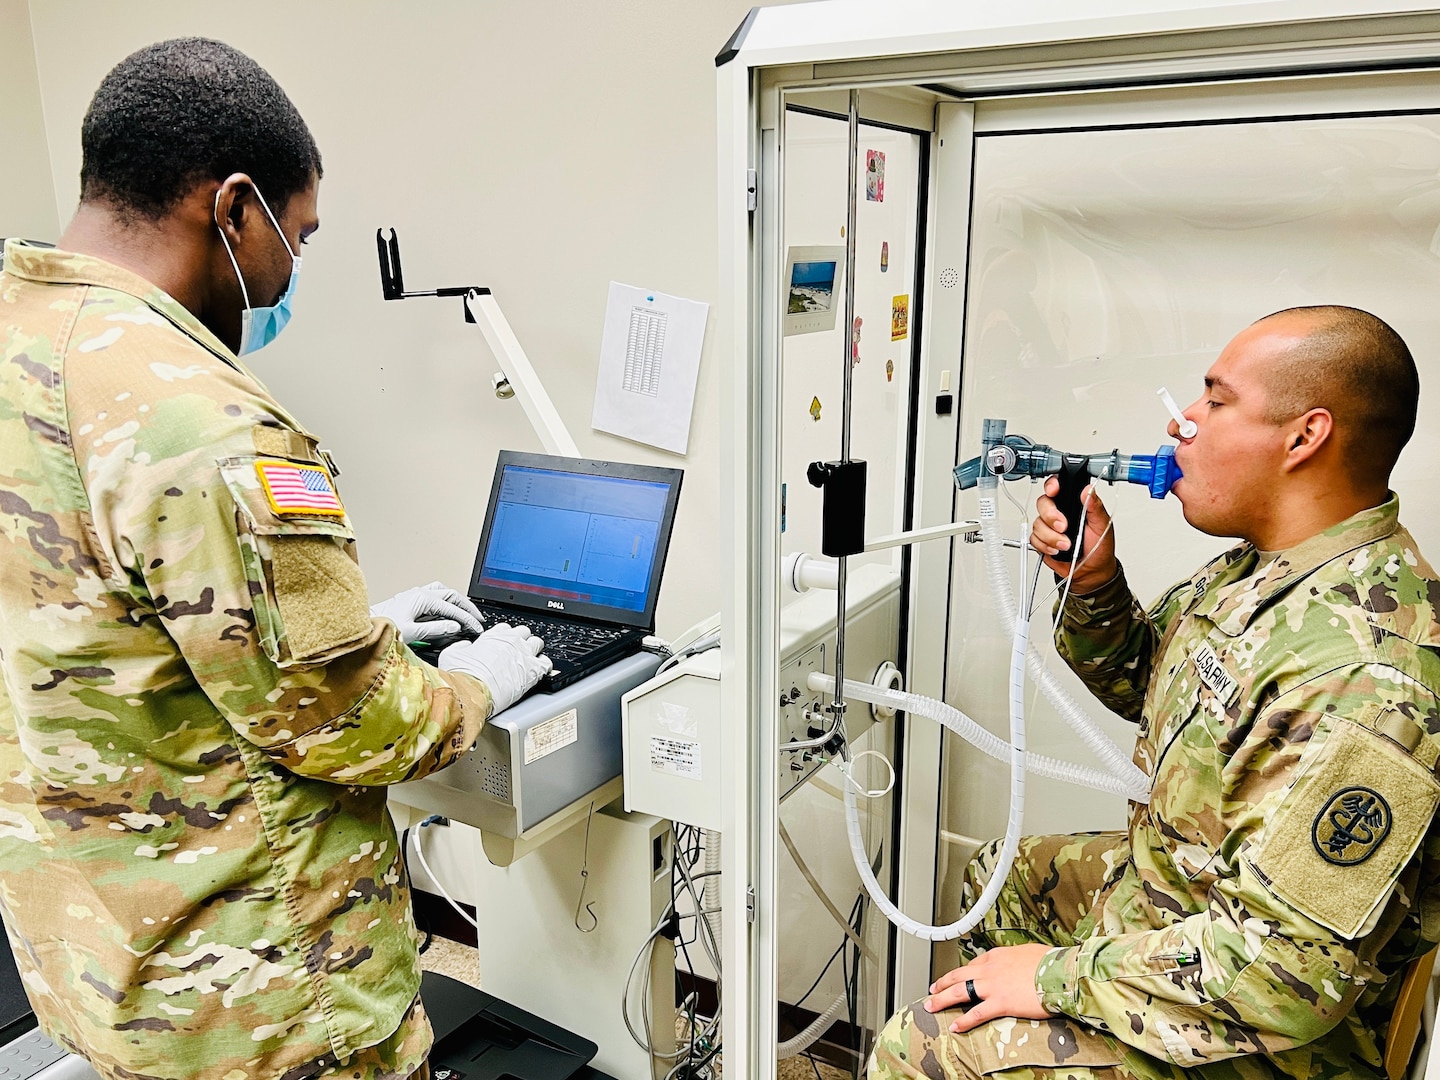 Sgt. Elvin E. Vann III, respiratory specialist, Bayne-Jones Army Community administers the pulmonary function test to Cpl. Giovani Gonzalez to measure his lung function and capacity at the Joint Readiness Training Center and Fort Polk, La., on Oct. 6.